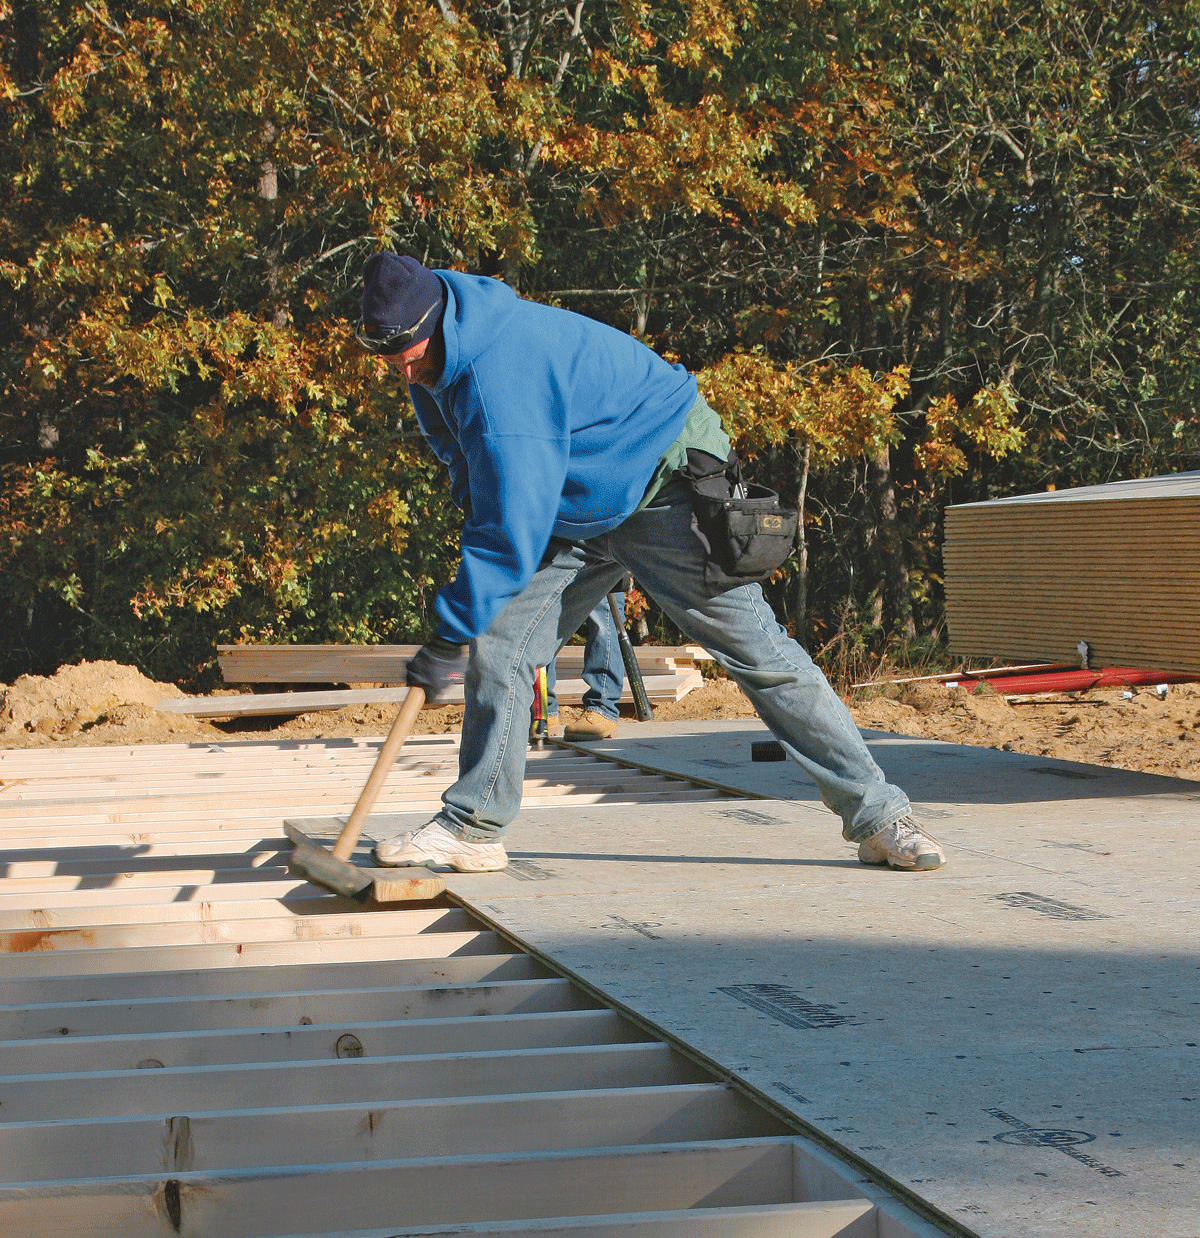 To mate the tongue and groove edges, have a helper stand on the edges as you drive the sheet into place. When working solo, hold the edges in line with one foot as you tap with the sledge hammer.